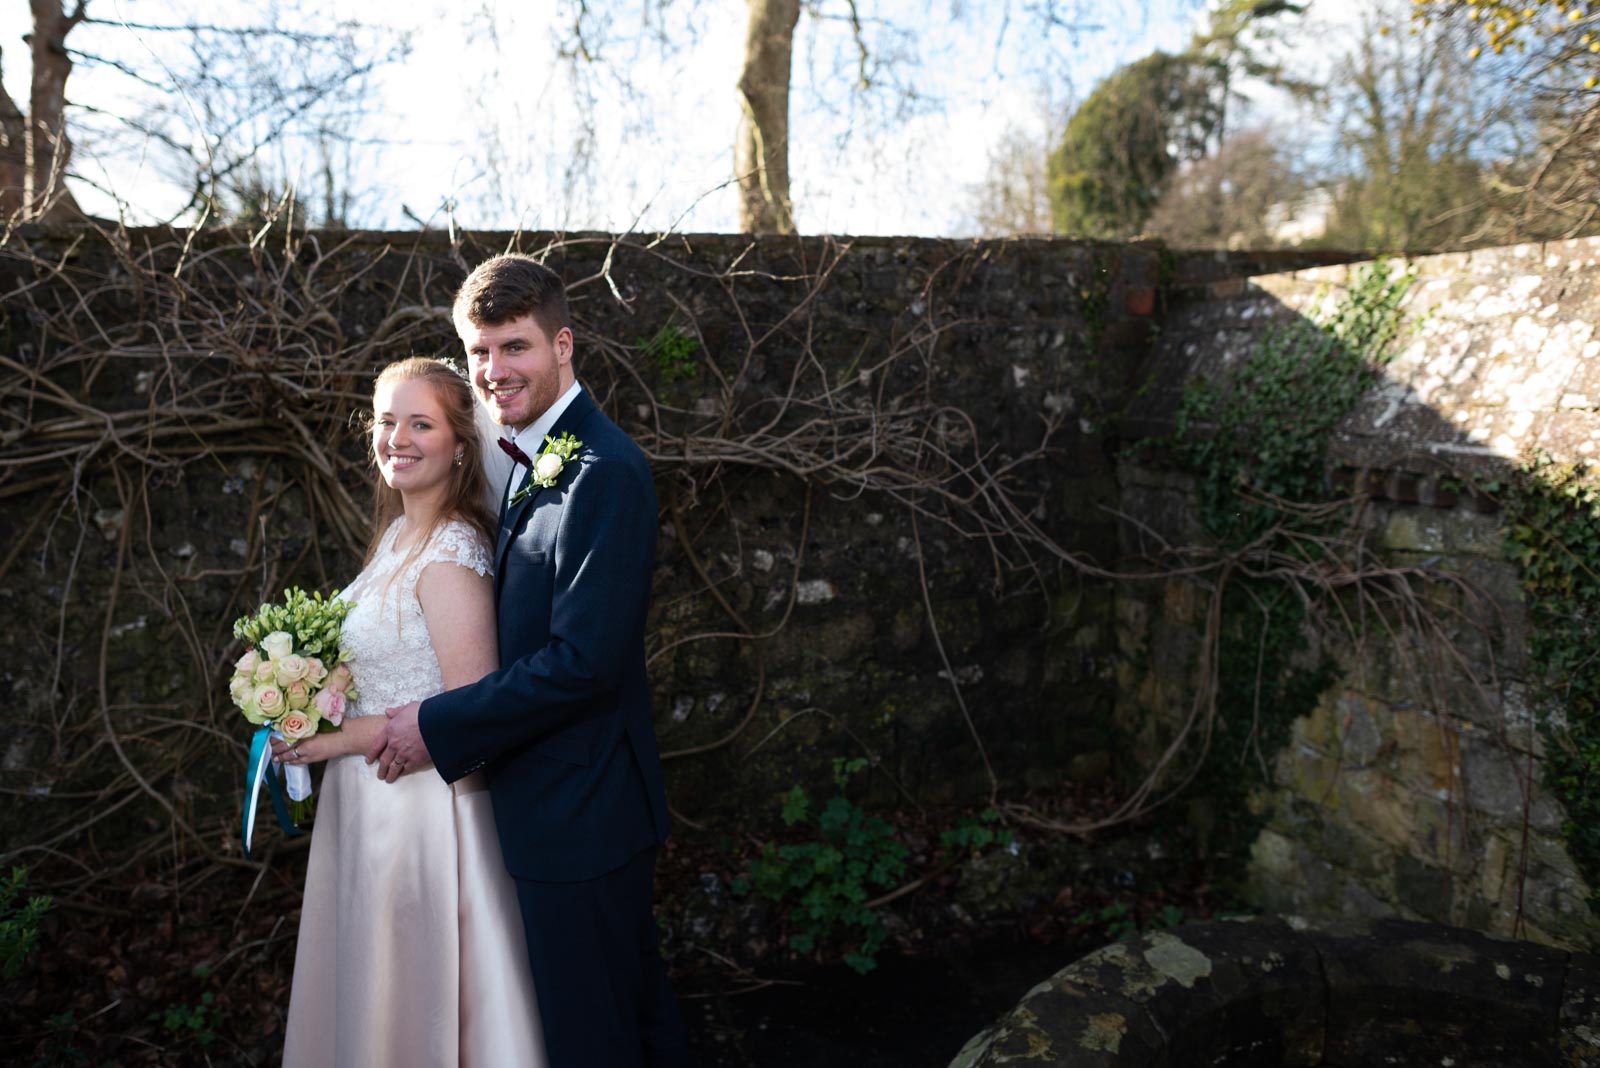 Belinda and Chris pose in Southover Grange after their wedding at Lewes Register Office.